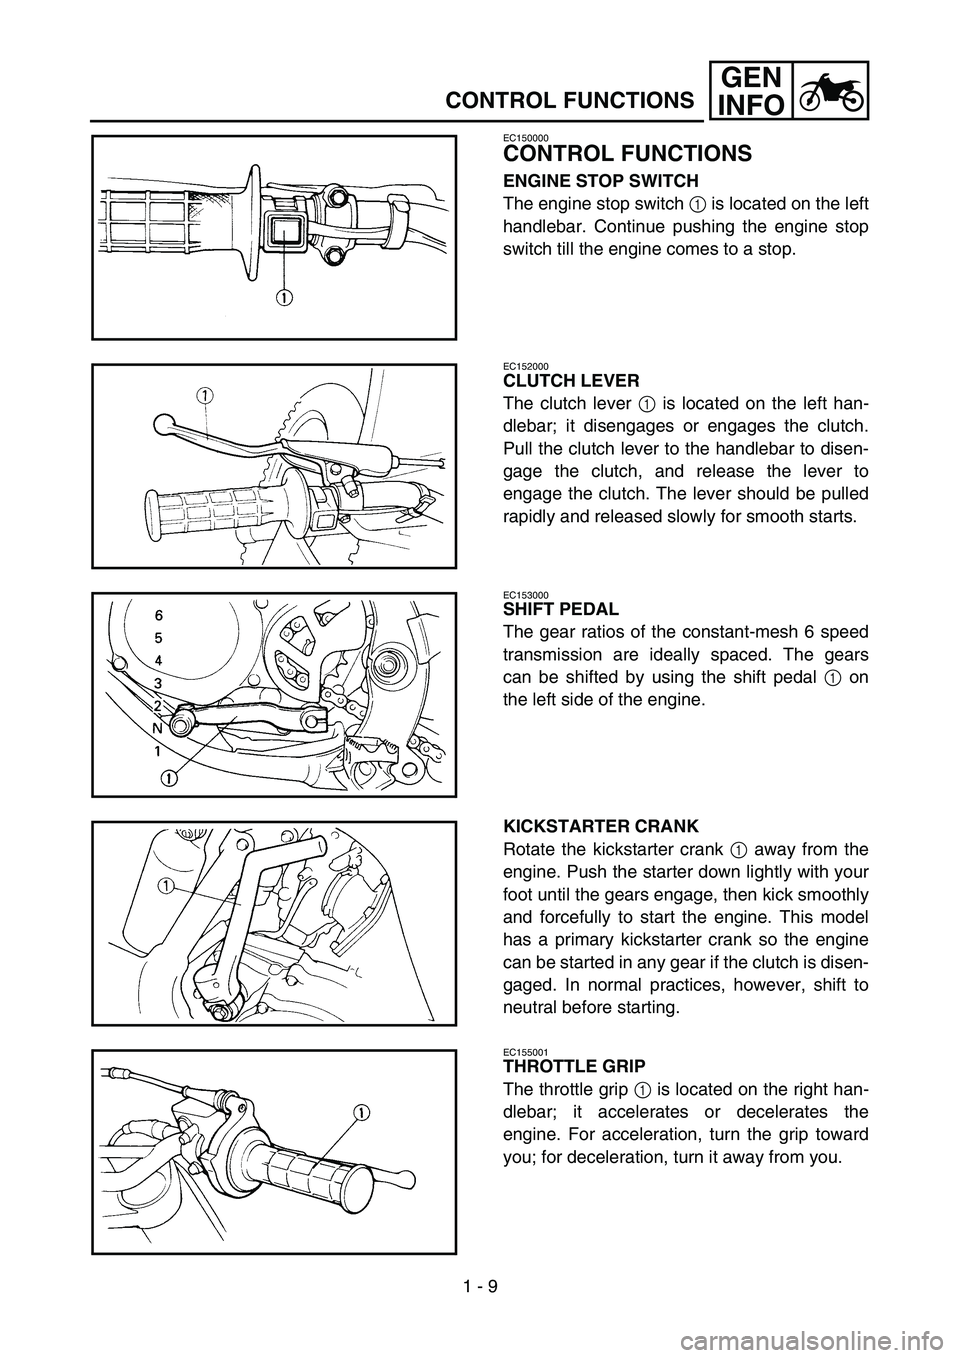 YAMAHA YZ85 2006 Service Manual 1 - 9
GEN
INFO
CONTROL FUNCTIONS
EC150000
CONTROL FUNCTIONS
ENGINE STOP SWITCH
The engine stop switch 1 is located on the left
handlebar. Continue pushing the engine stop
switch till the engine comes 